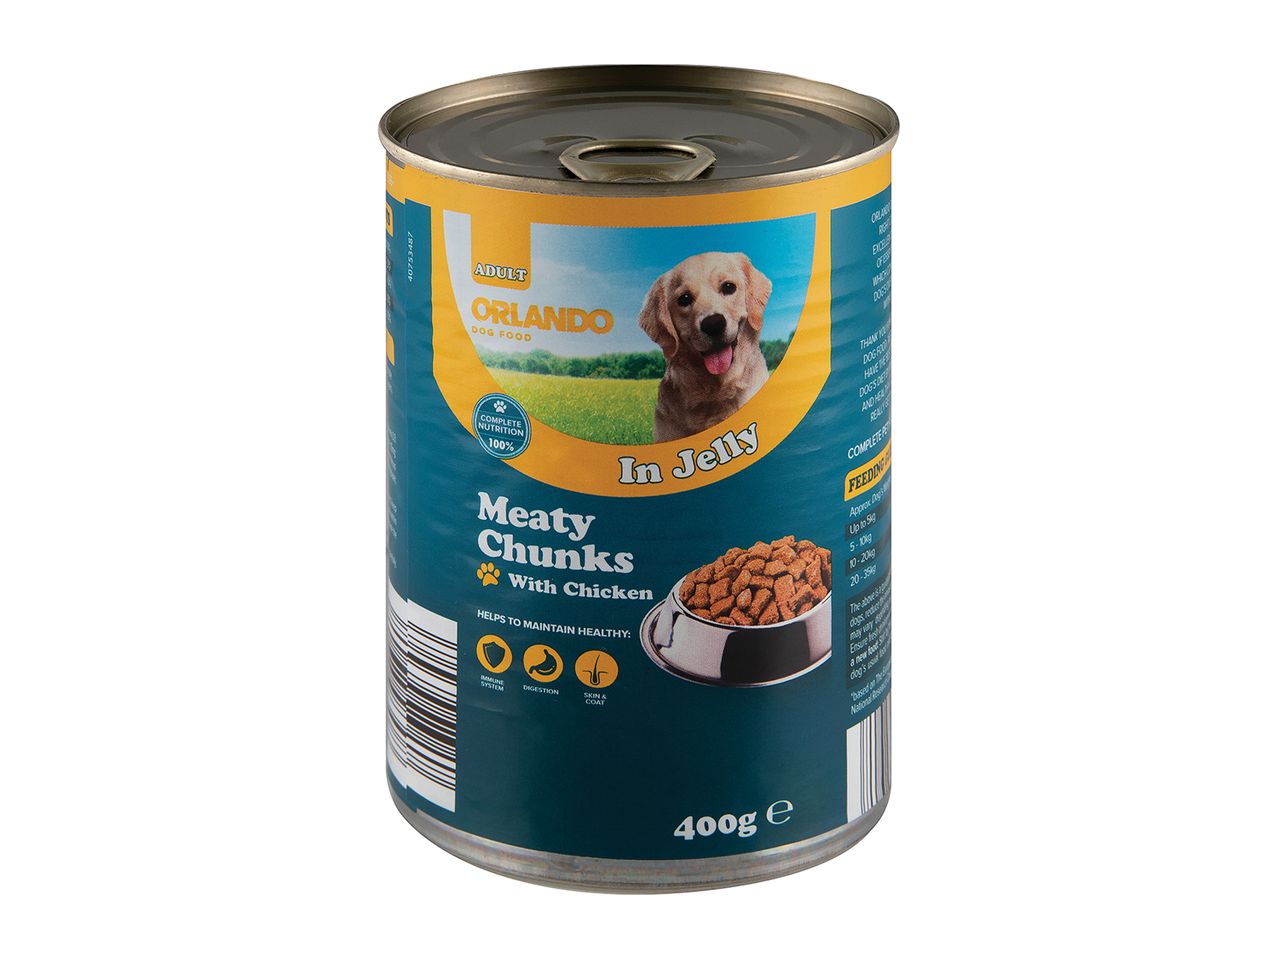 Go to full screen view: Orlando Dog Food Can - Image 1